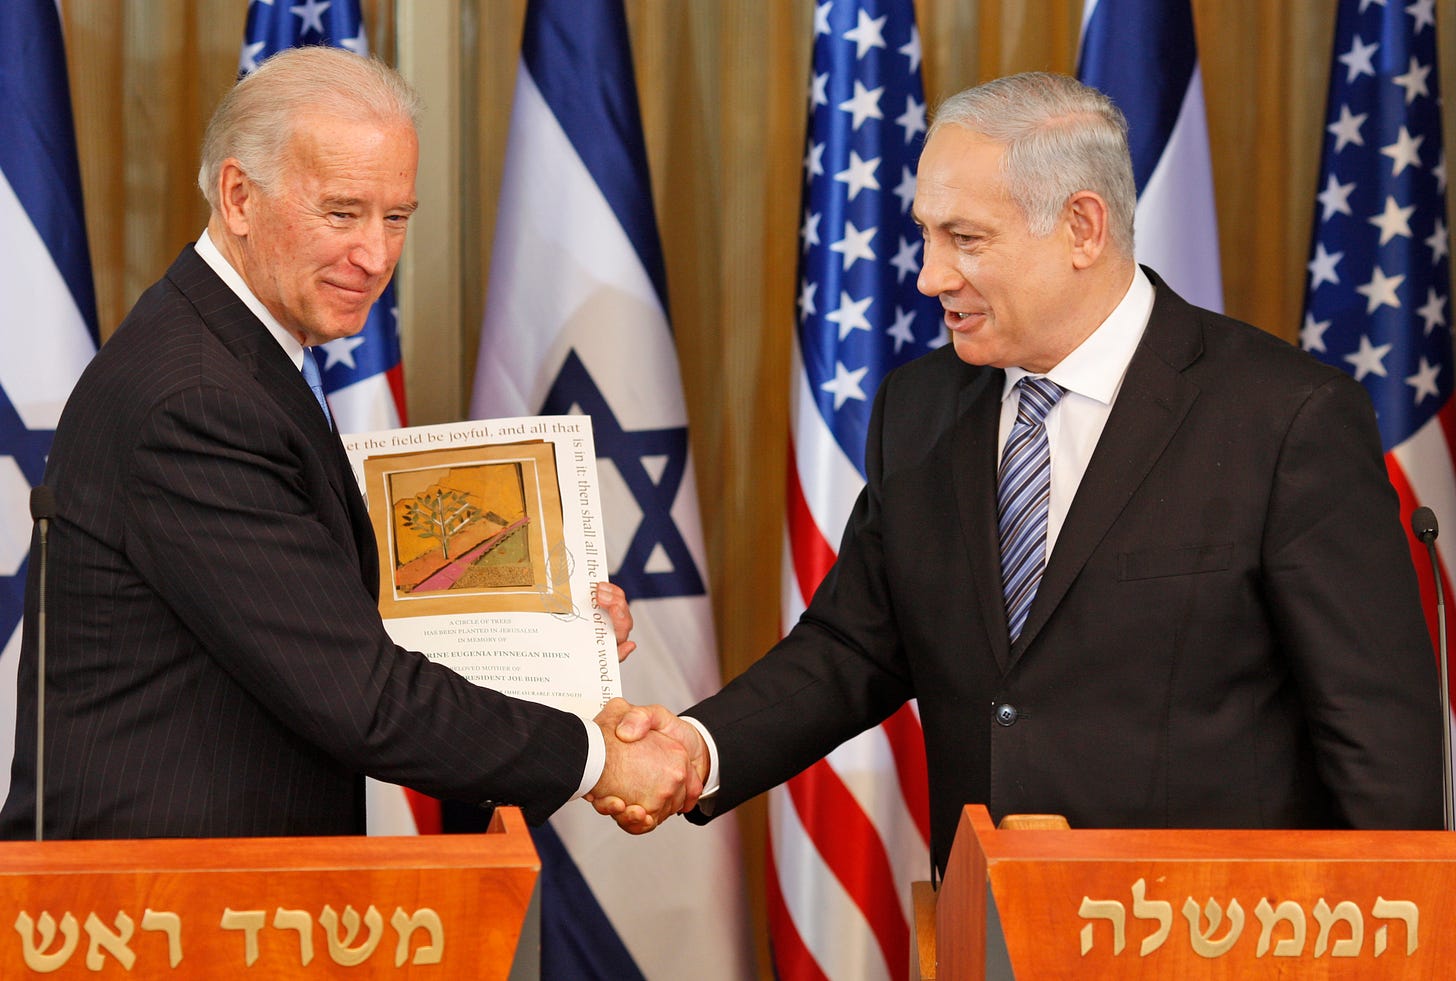 Biden and Netanyahu face rough early test of relationship - The Boston ...